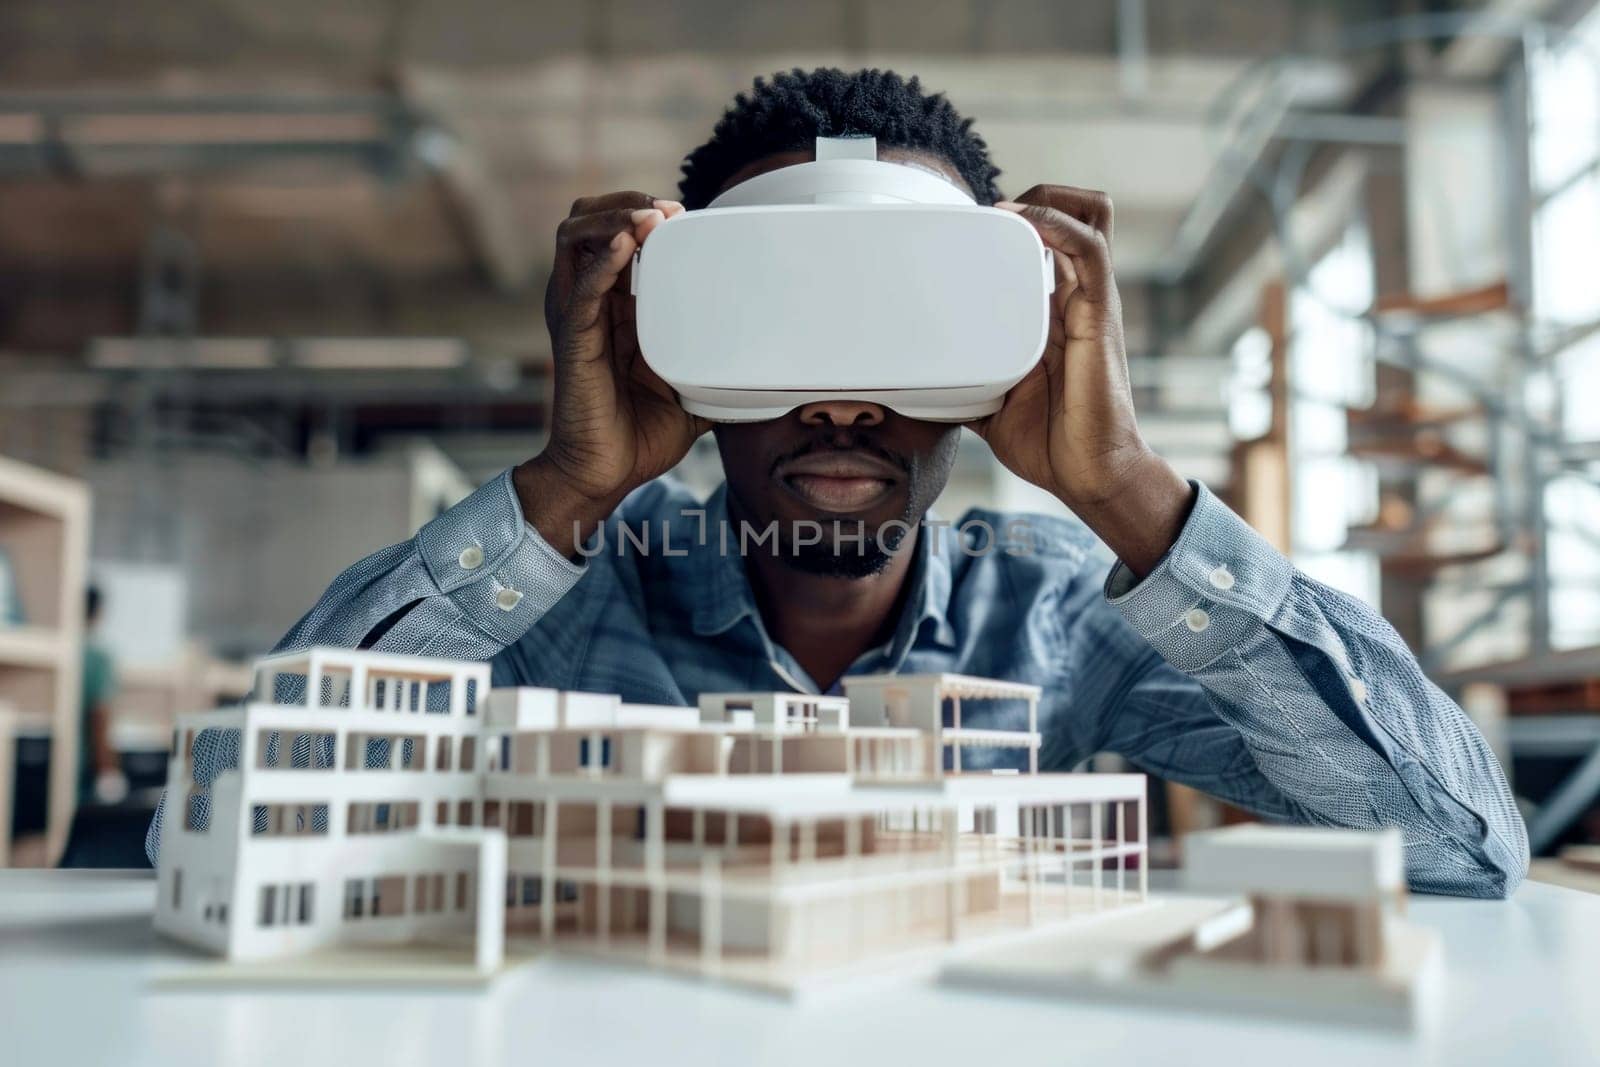 Concept futuristic design. Man is African american Architect or Engineer wearing VR headset for working design.